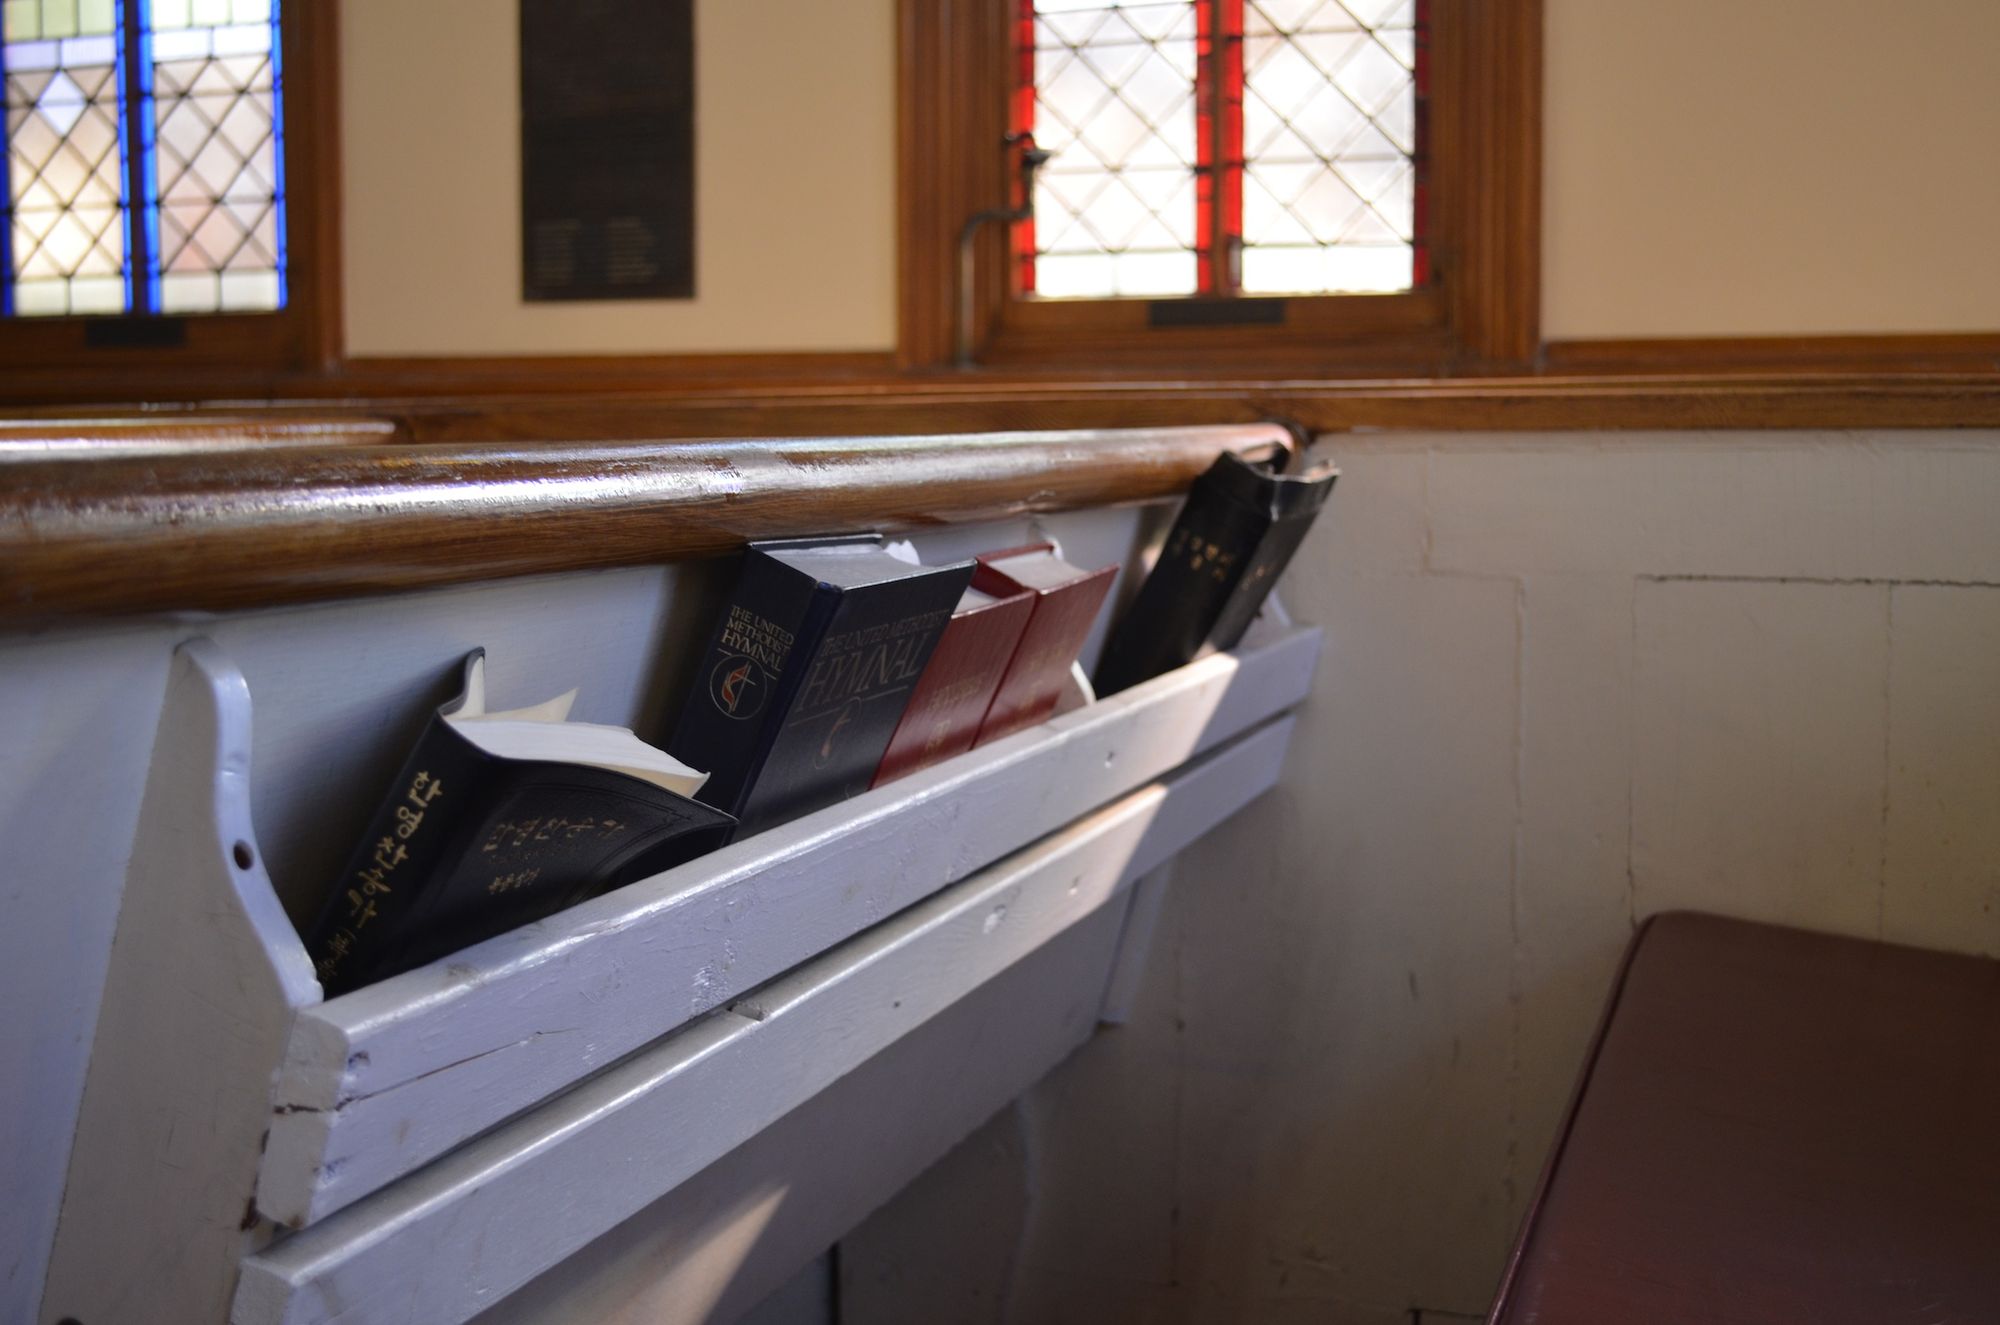 Bibles tucked behind a pew at the United Methodist Church of Sheepshead Bay.